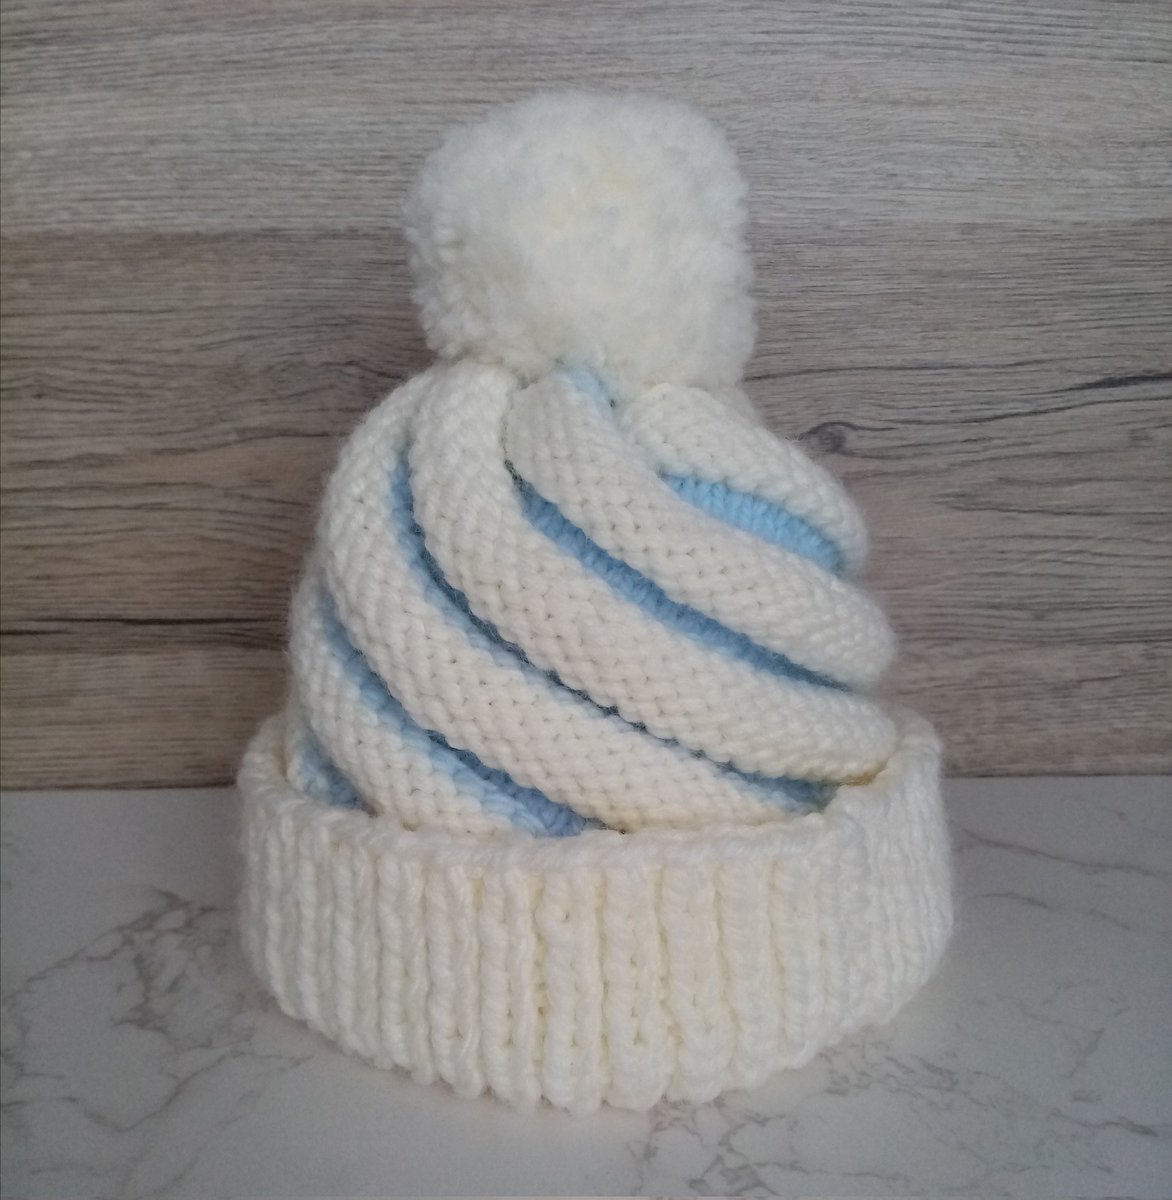 Cupcake swirl hat in comfort chunky cream and baby blue. Hand-made in Ireland ☘️💚☘️
folksy.com/shops/littlere…
#CraftBizParty
#HandmadeHour
#folksy
#hats
#funhats
#UKGIFTHOUR
#specialoccasions
#handmade
#swirlhat